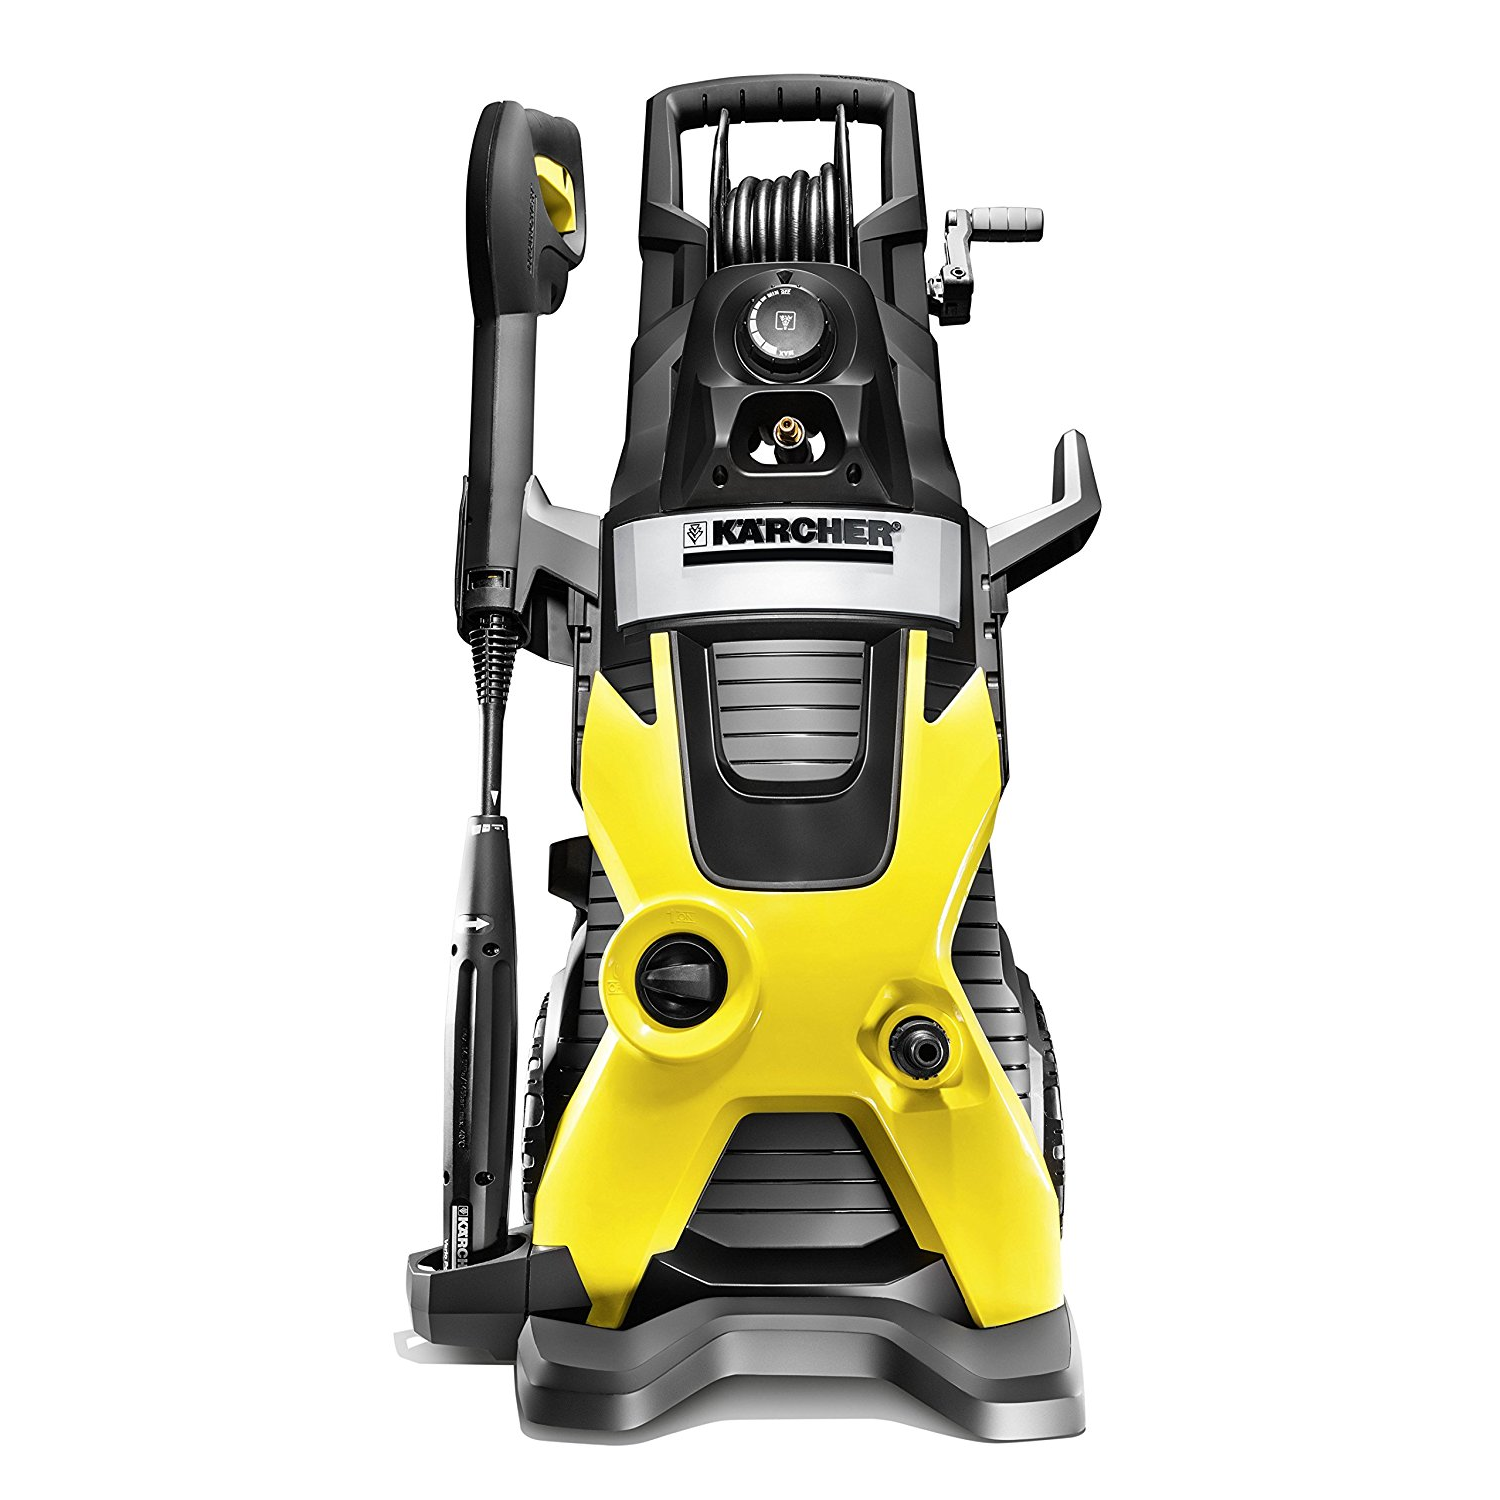 Karcher K5 Premium Electric Pressure Power Washer Only $199.99 Shipped!